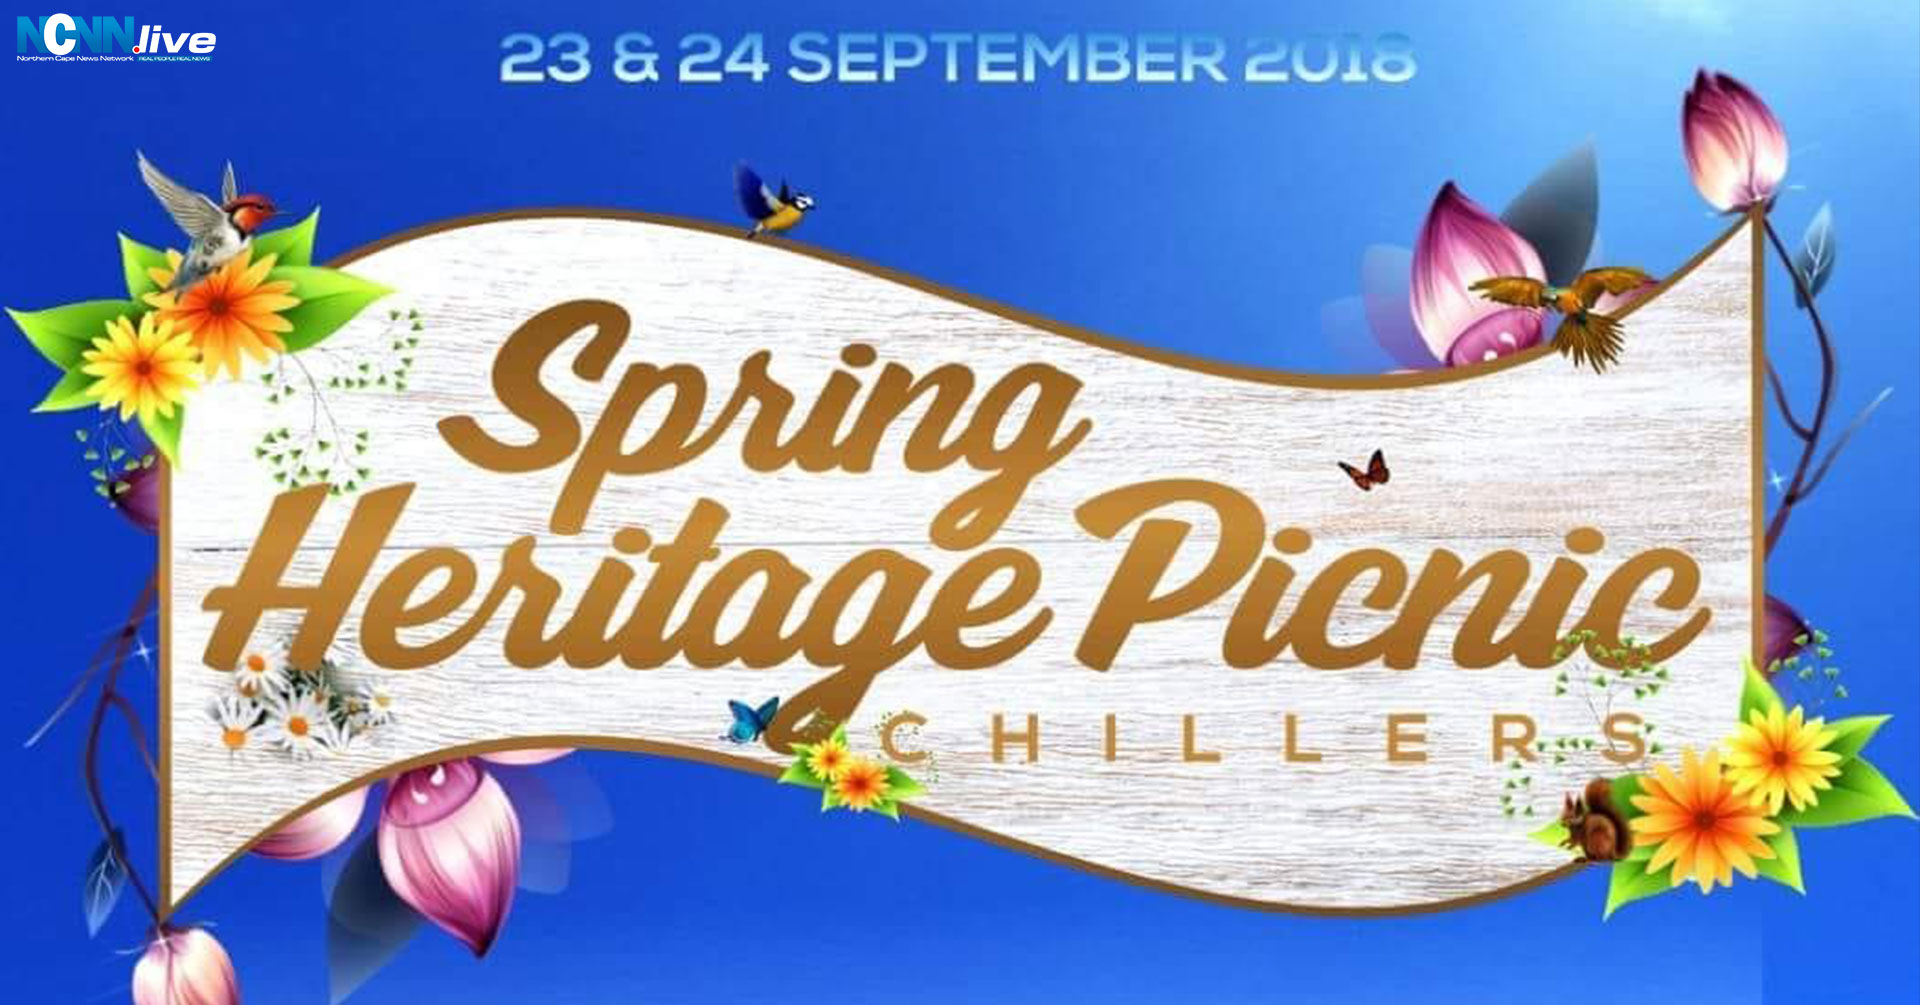 Kimberley's_Spring_Heritage_Picnic_Chillers_Promises_Sunny_Groove-FI